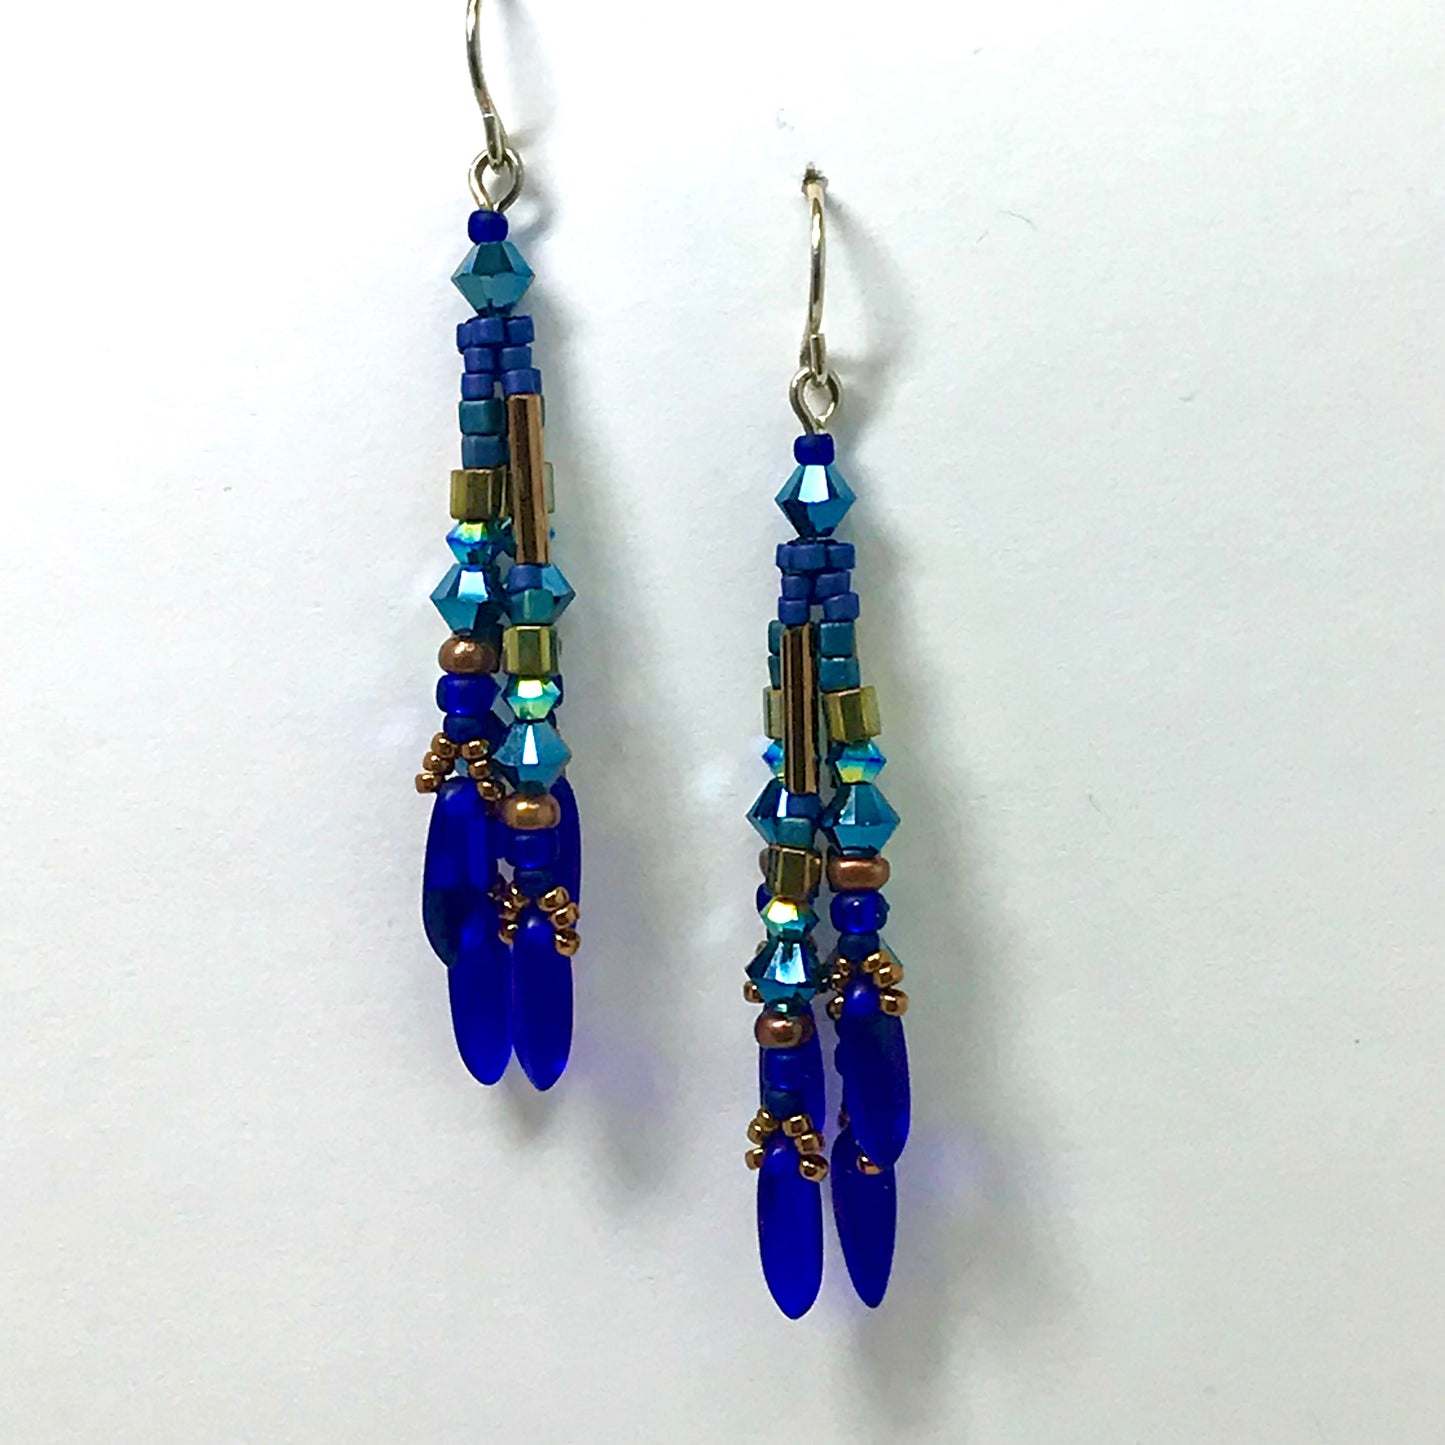 Midnight Blue with Cobalt Fringy Earrings